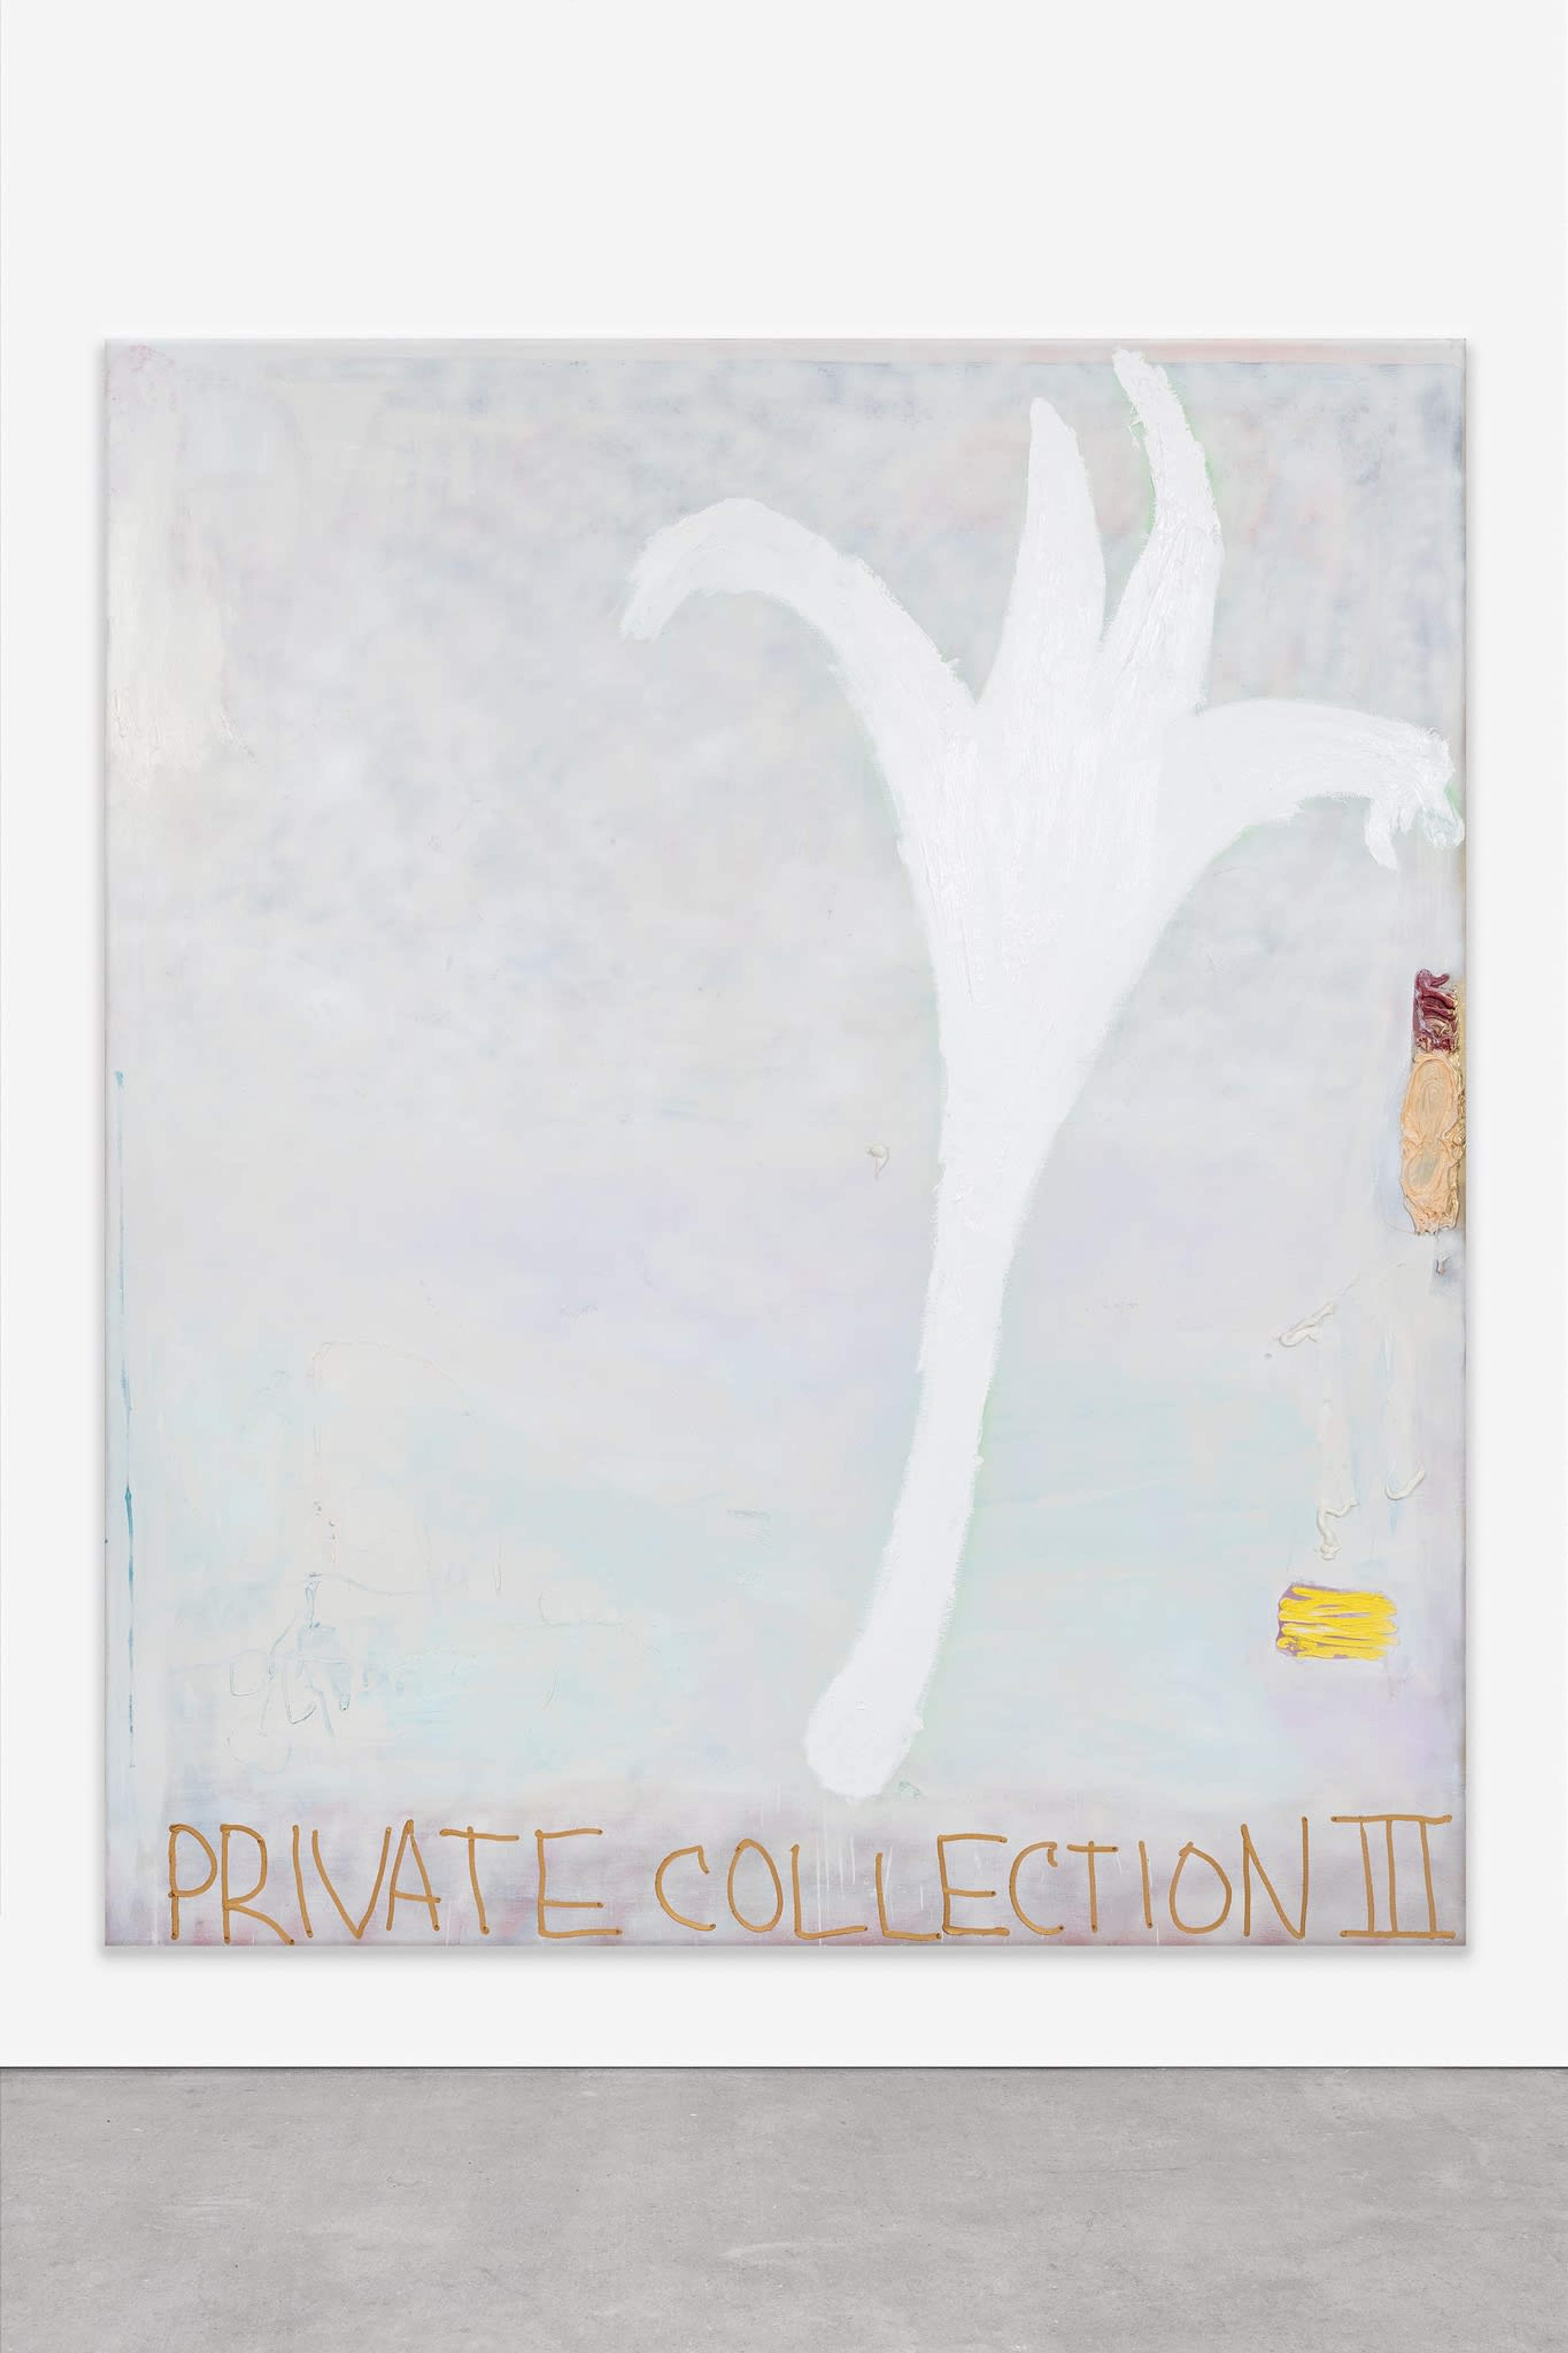 Sebastian Helling, Private Collection III